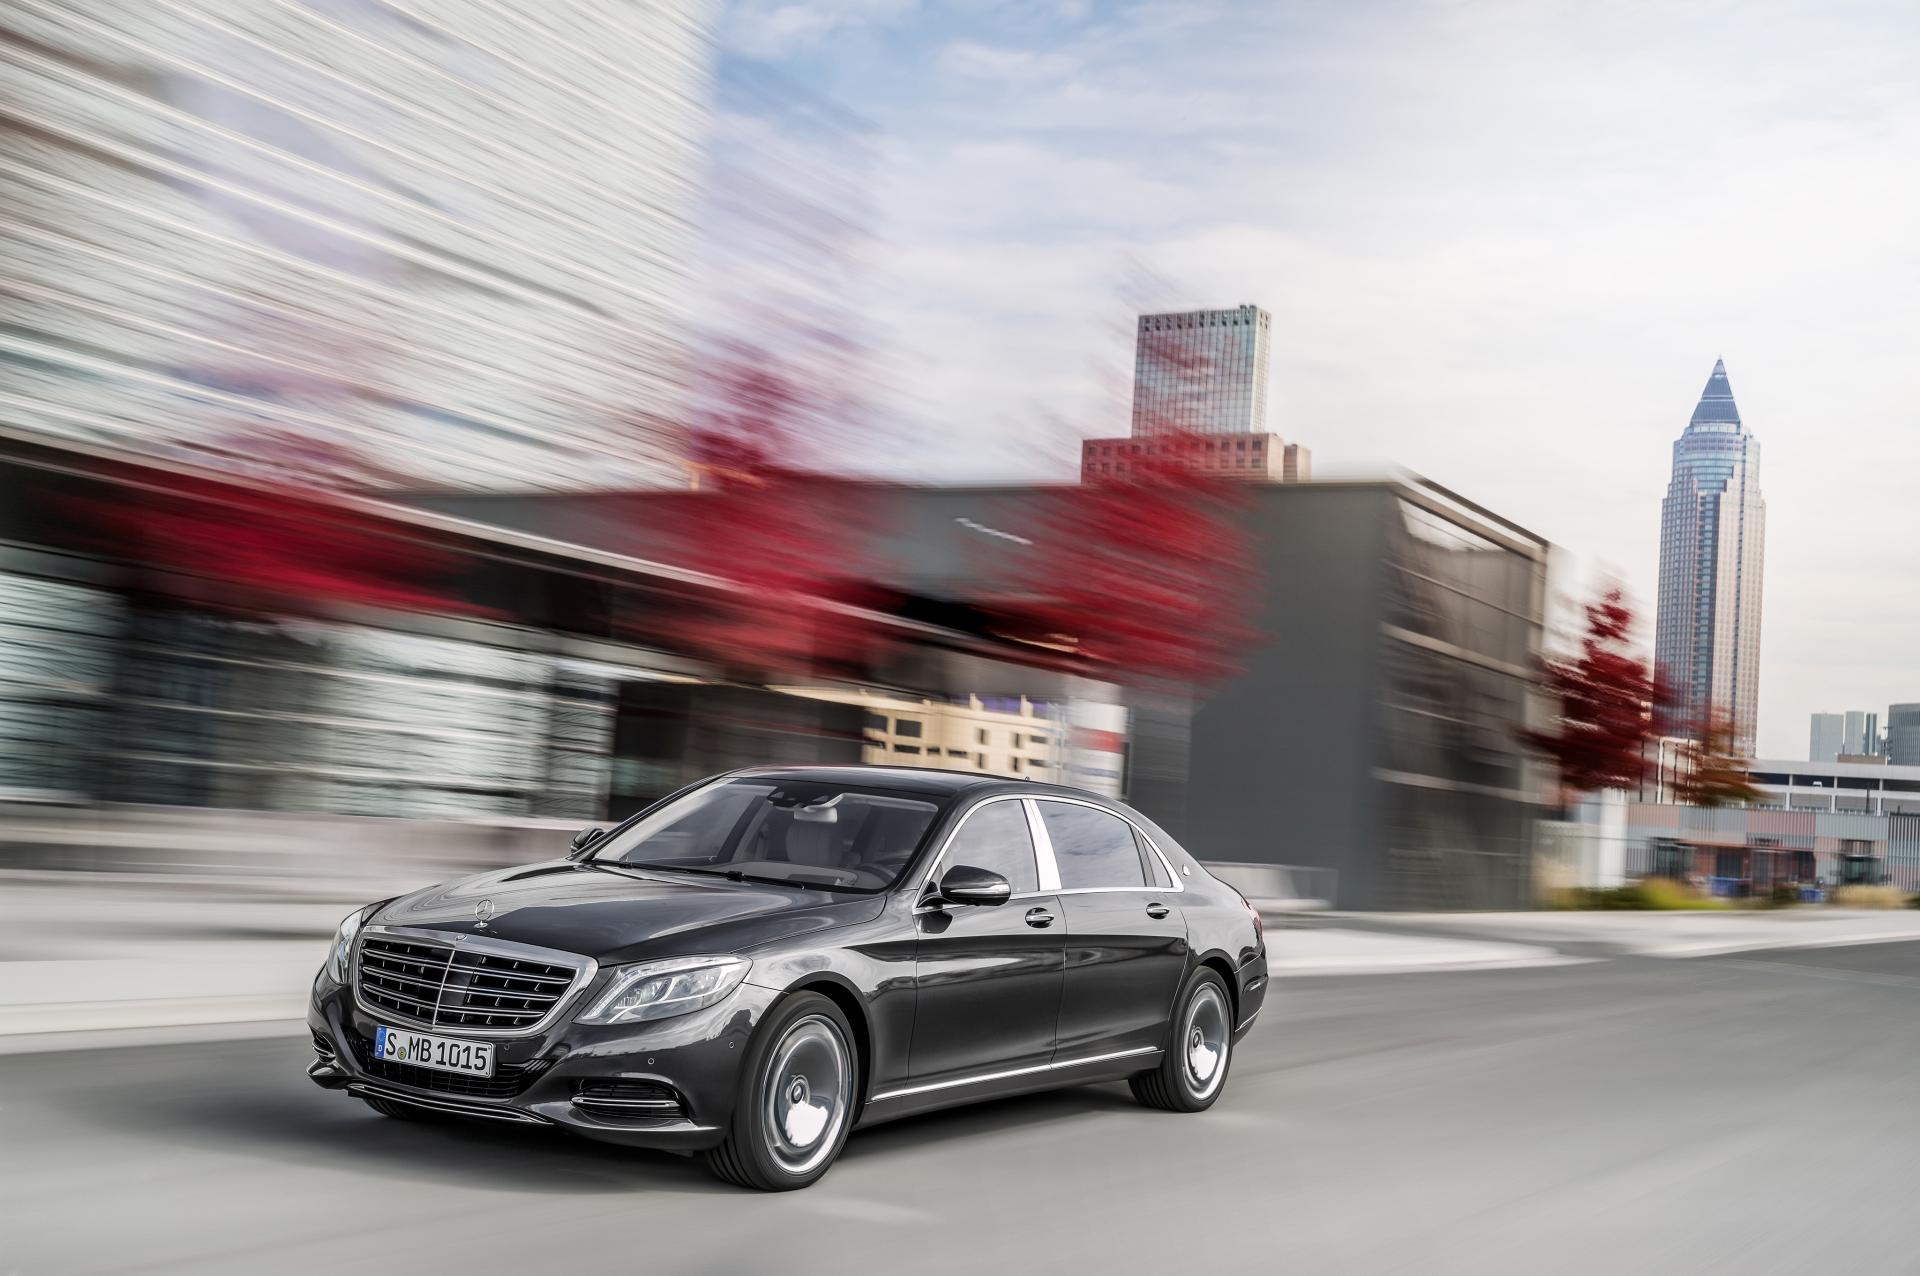 Mercedes-Benz S-Class wallpapers HD quality